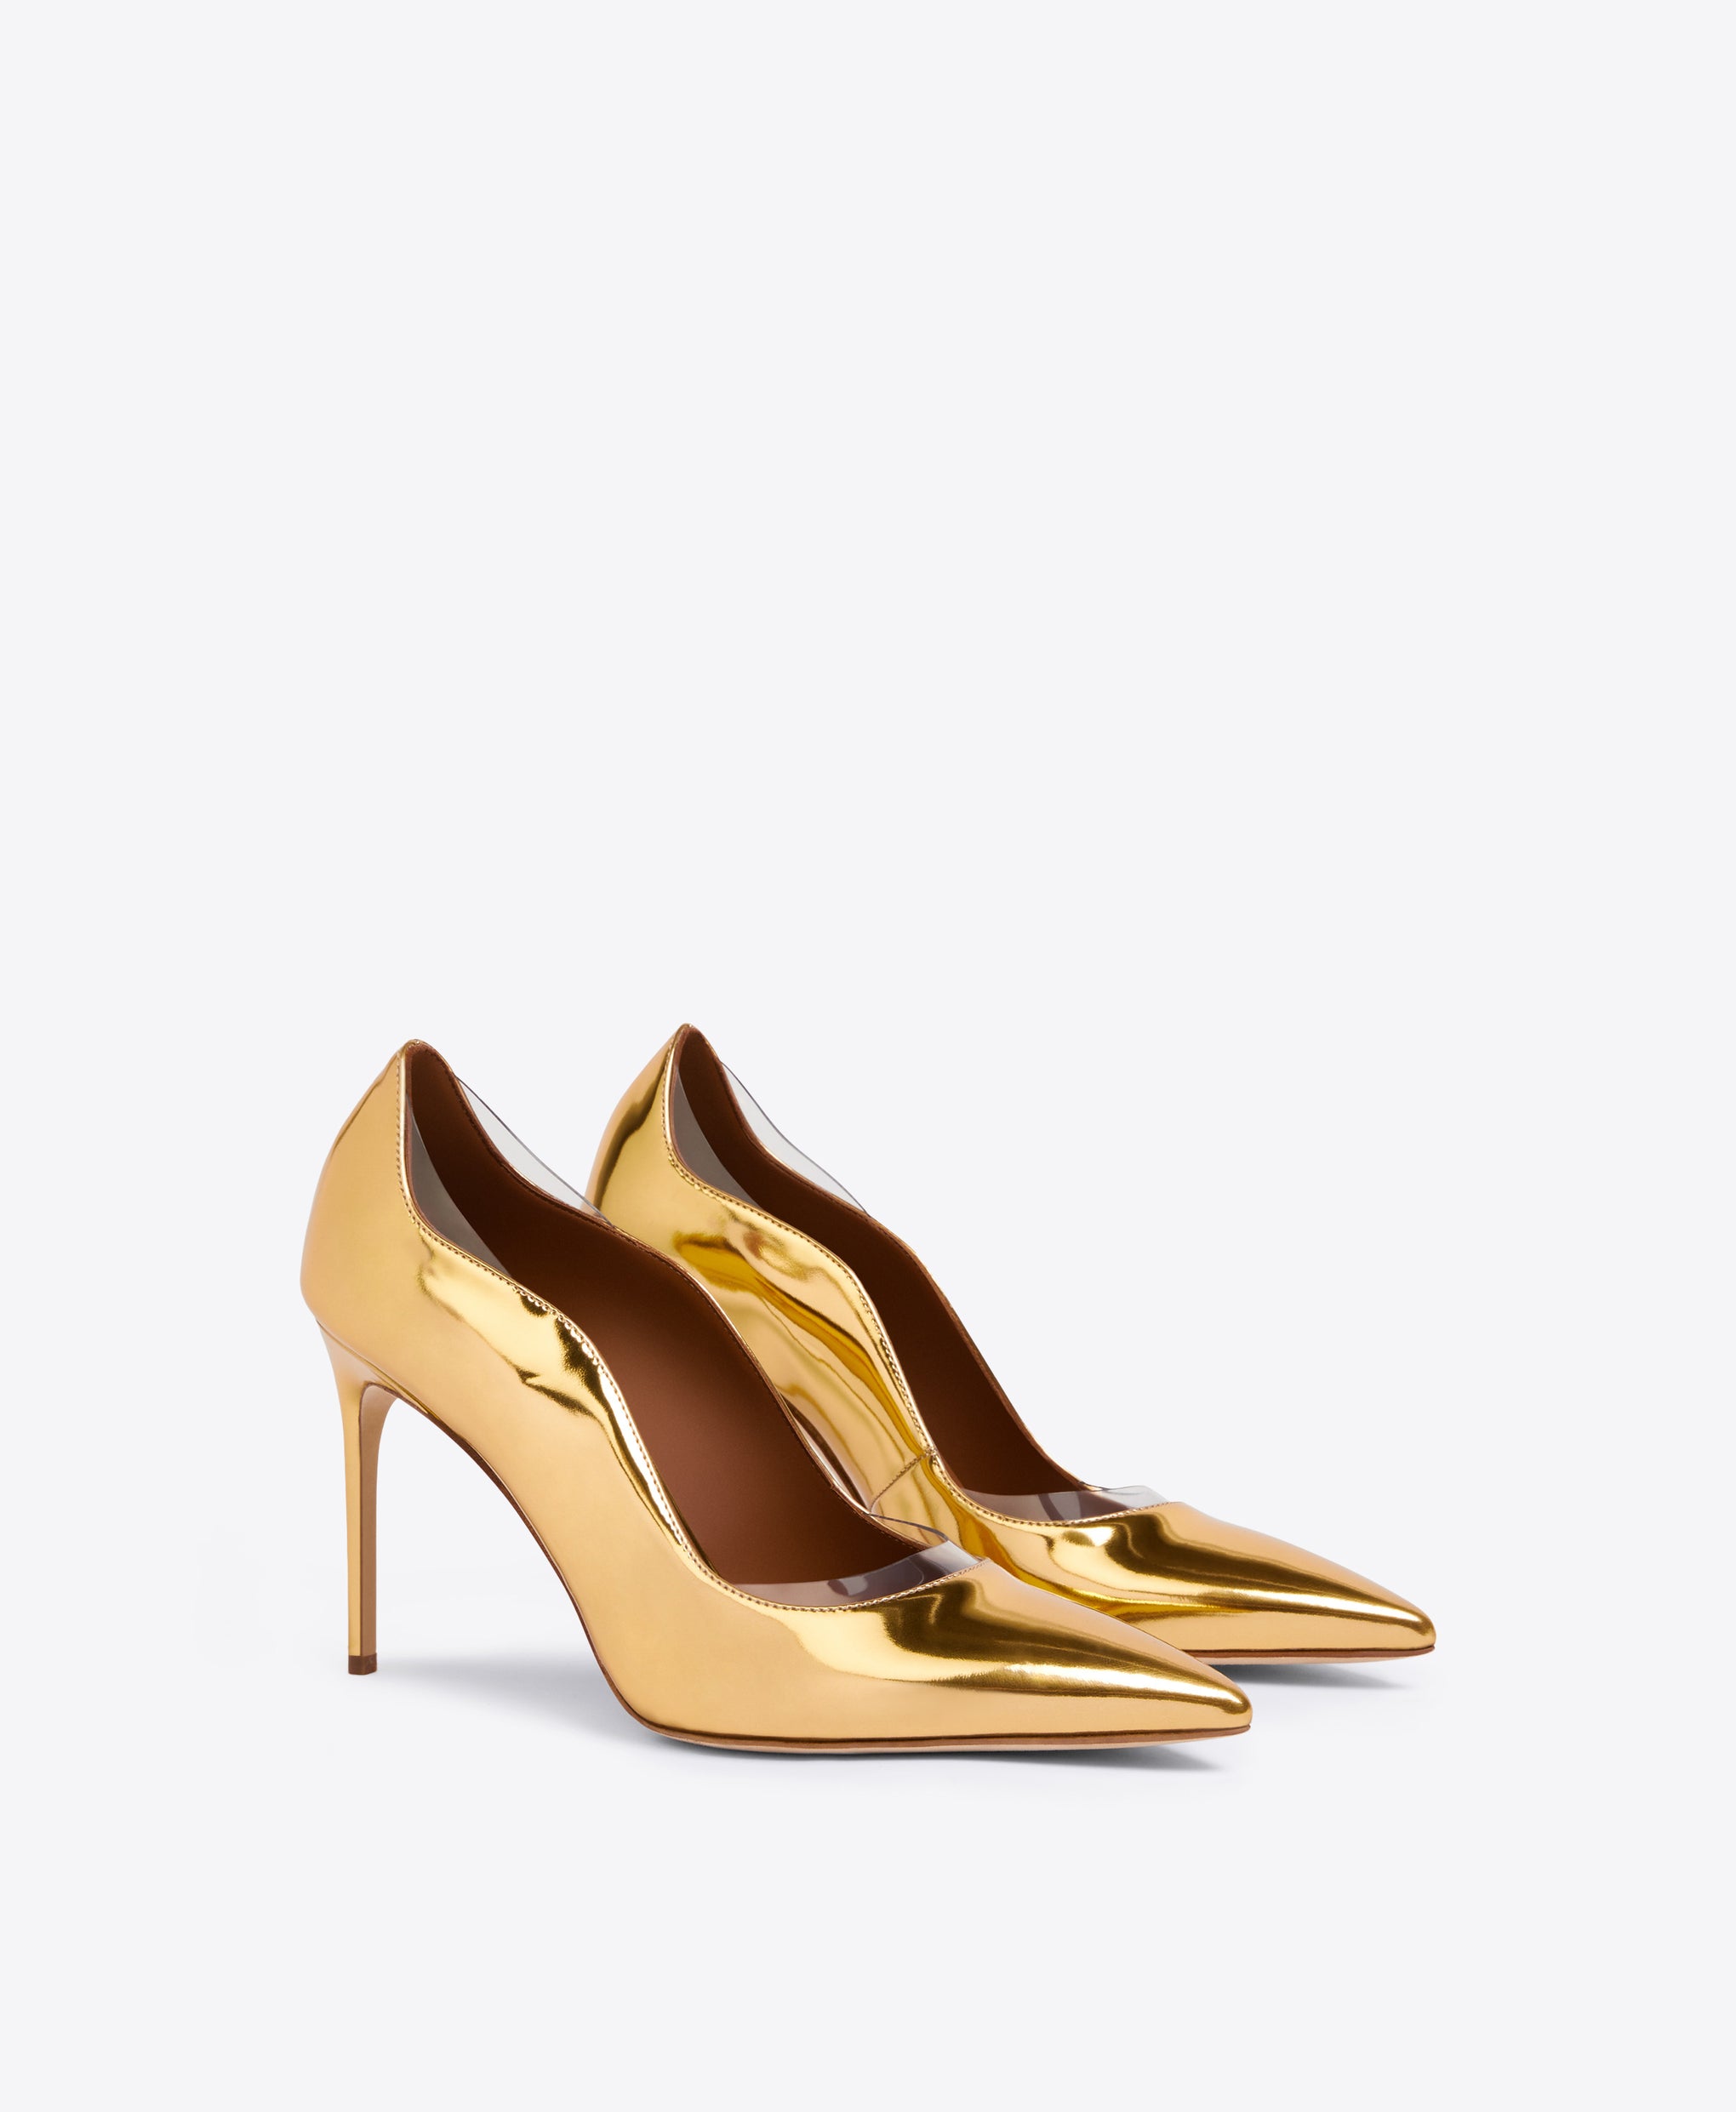 Nana 90mm - Gold Mirror Leather Stiletto Heels Malone Souliers